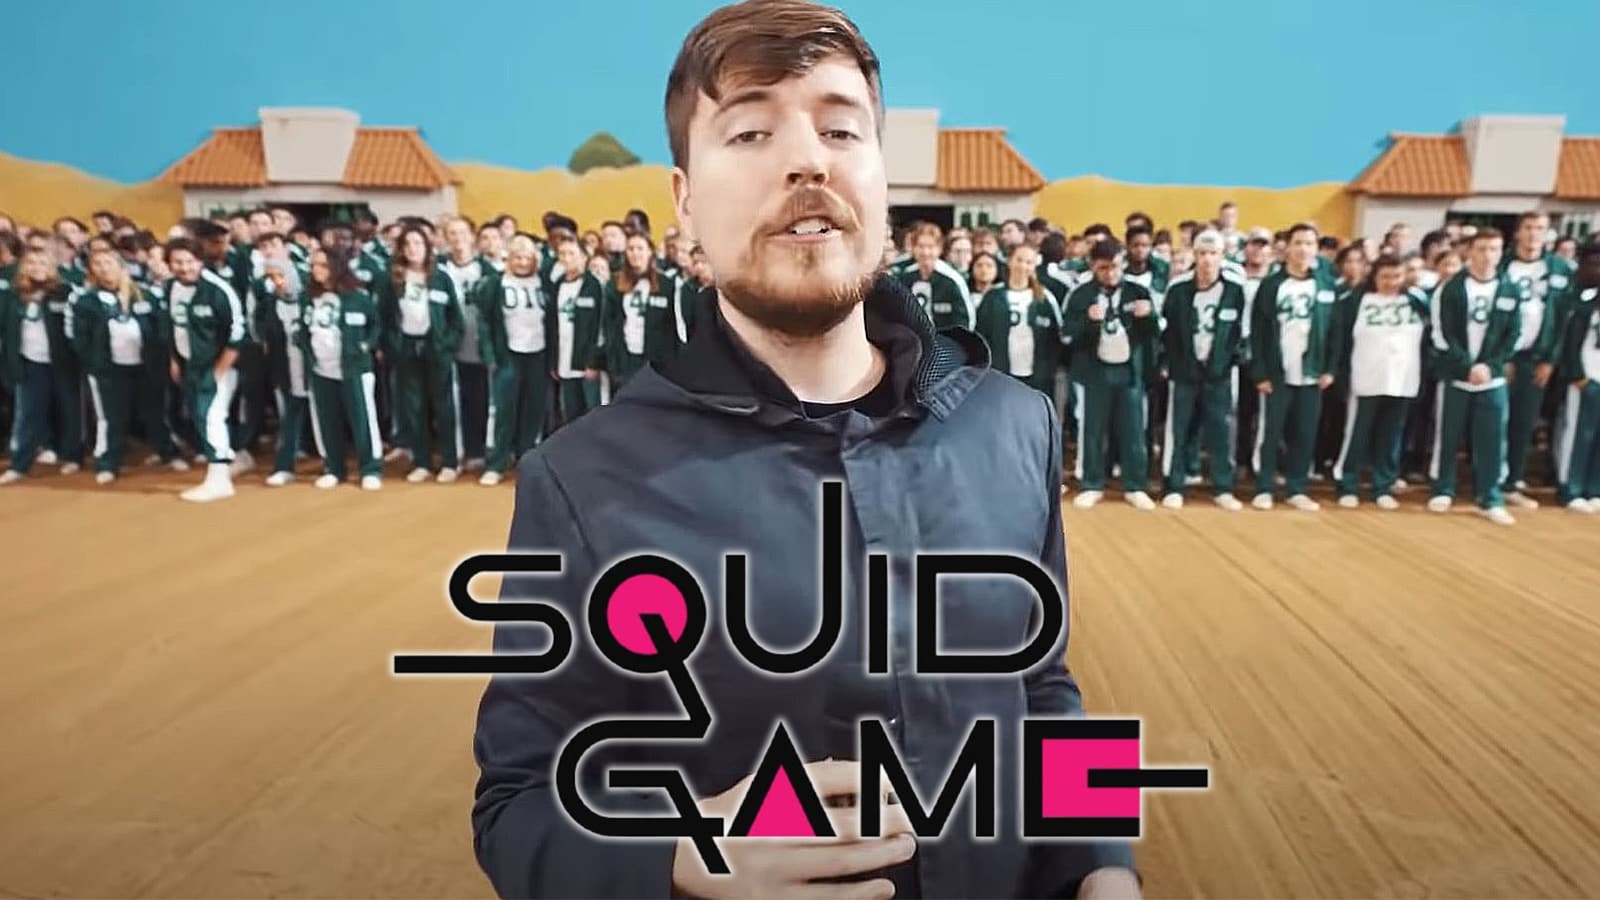 MrBeast under fire for viral Squid Game video